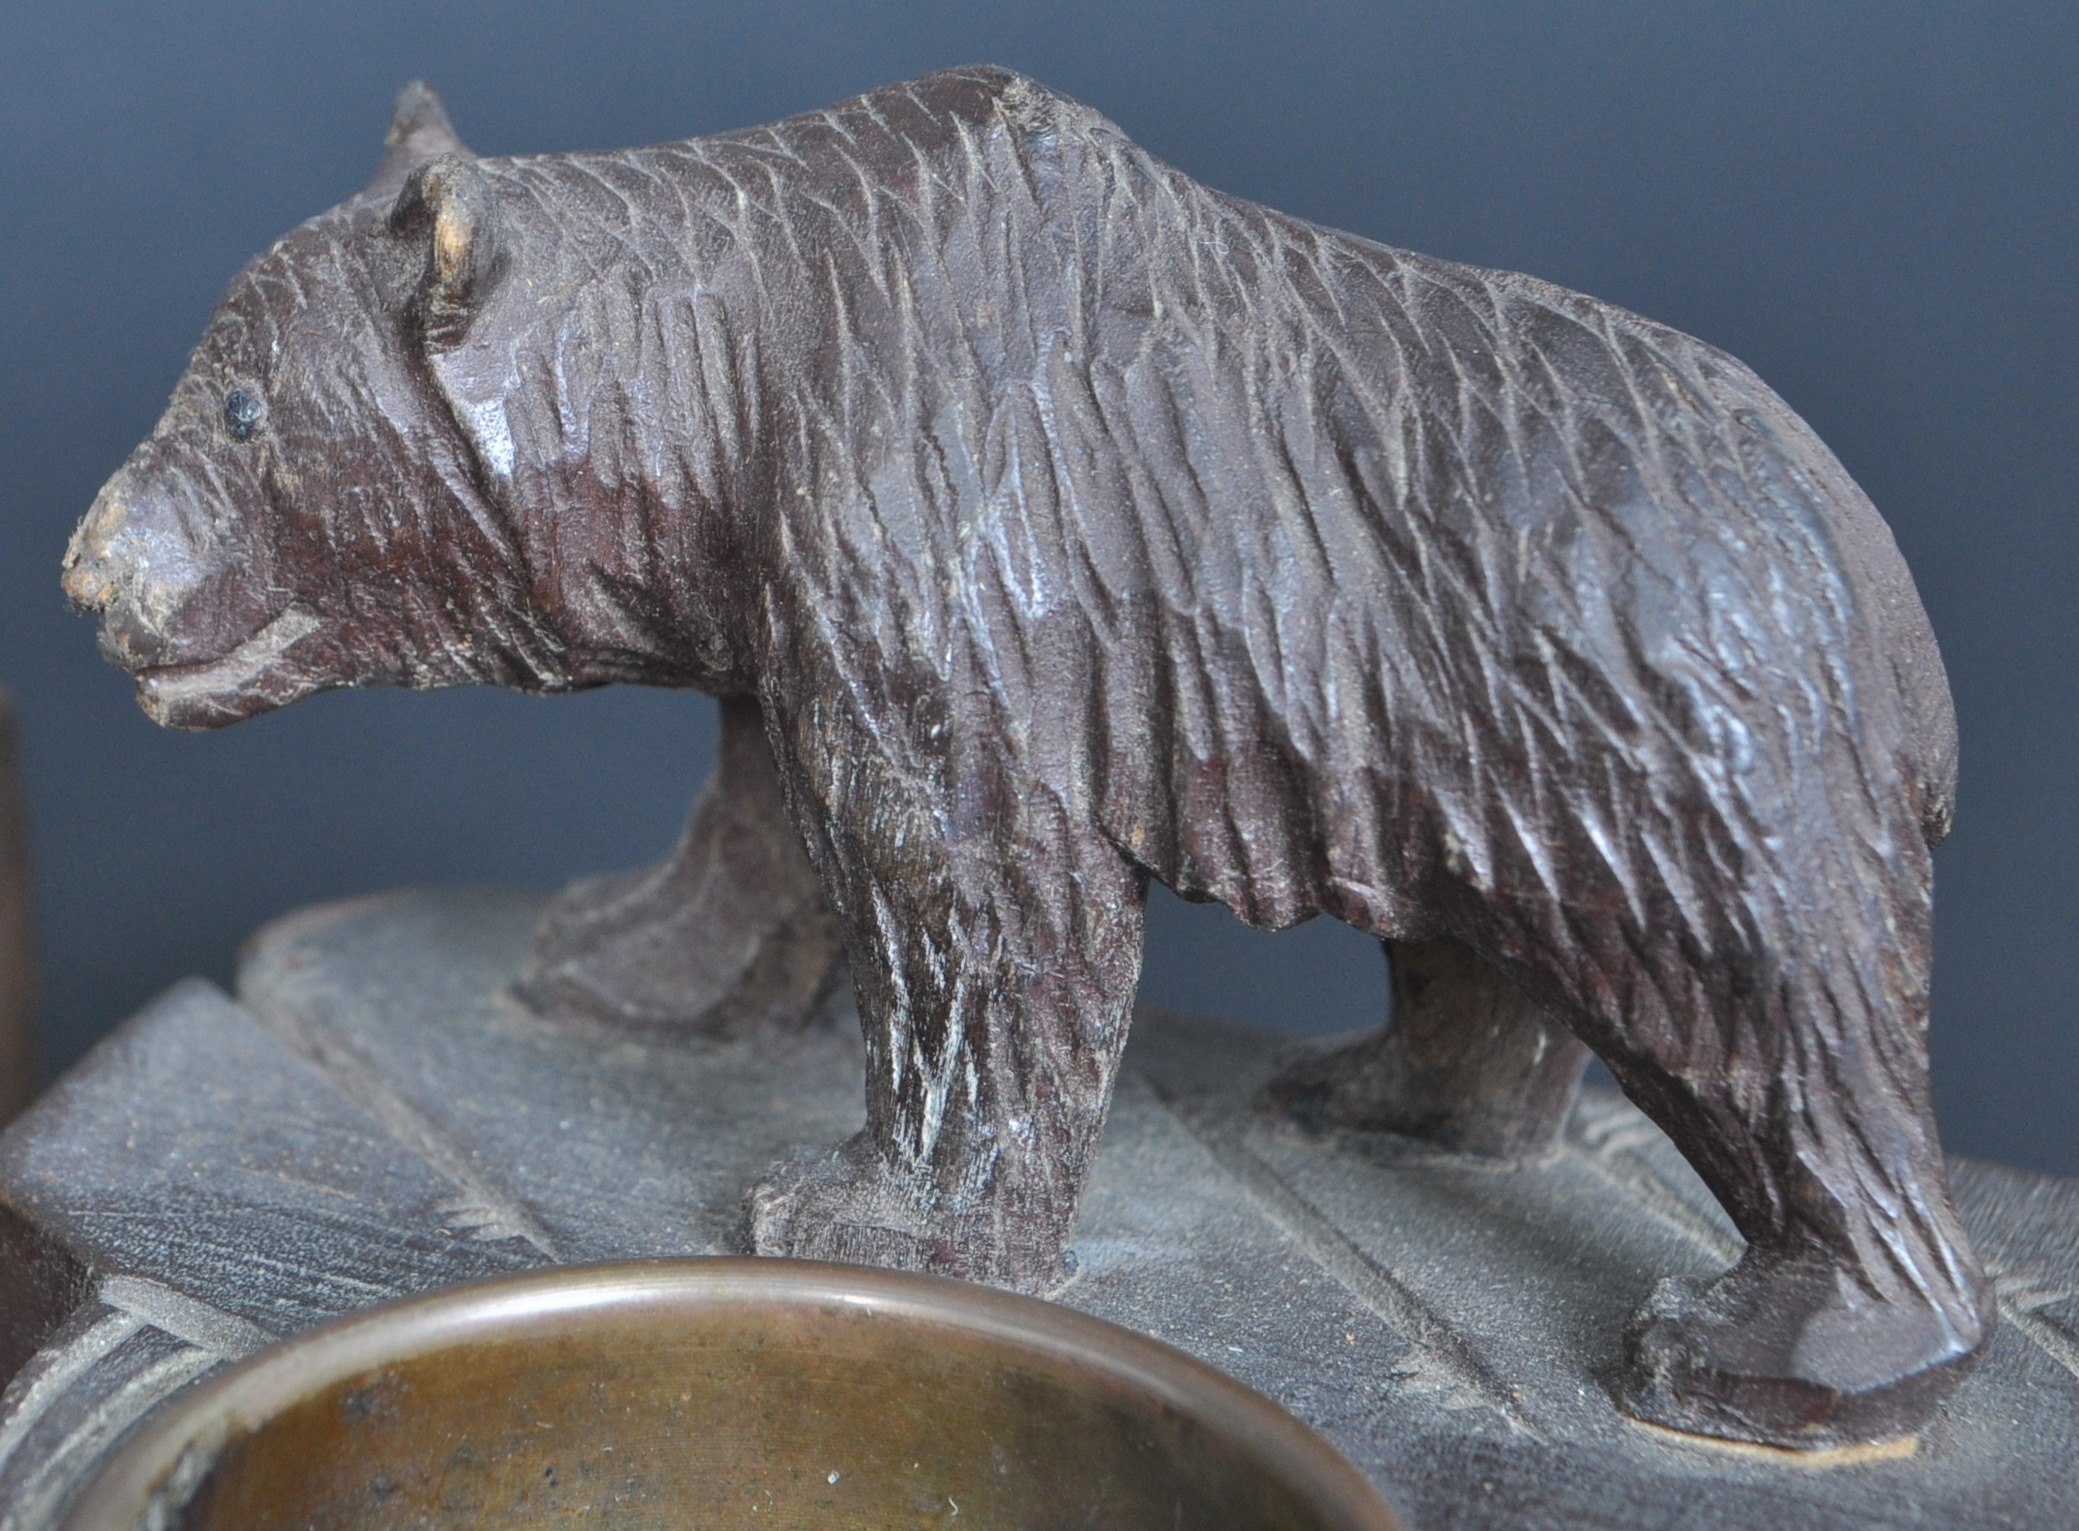 COLLECTION OF 19TH CENTURY HAND CARVED BLACK FOREST BEAR ITEMS - Image 5 of 6